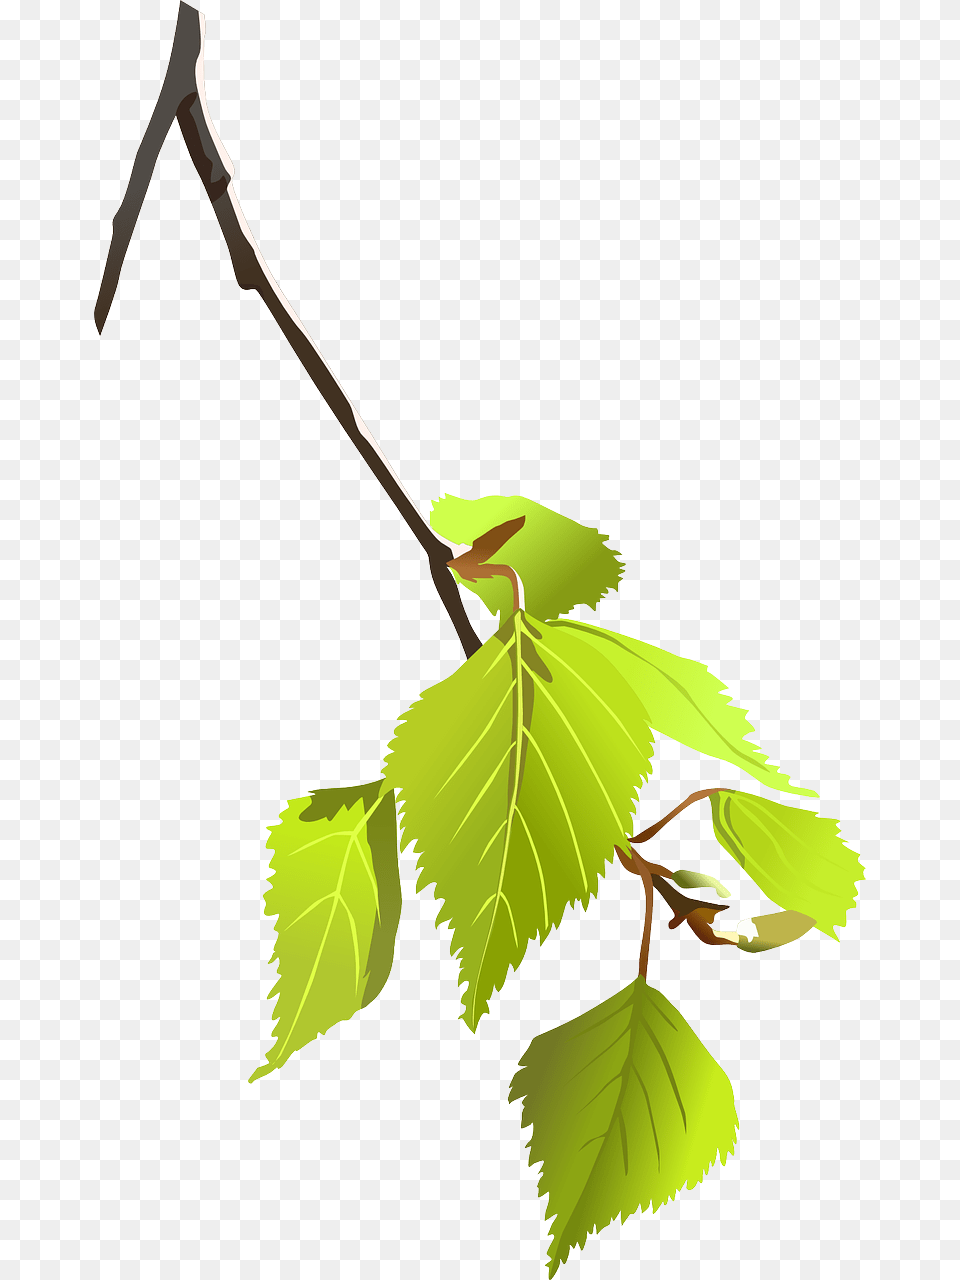 Tree Branch Clip Art Vector Clip Art Online Small Tree Branch, Leaf, Plant, Herbal, Herbs Free Transparent Png